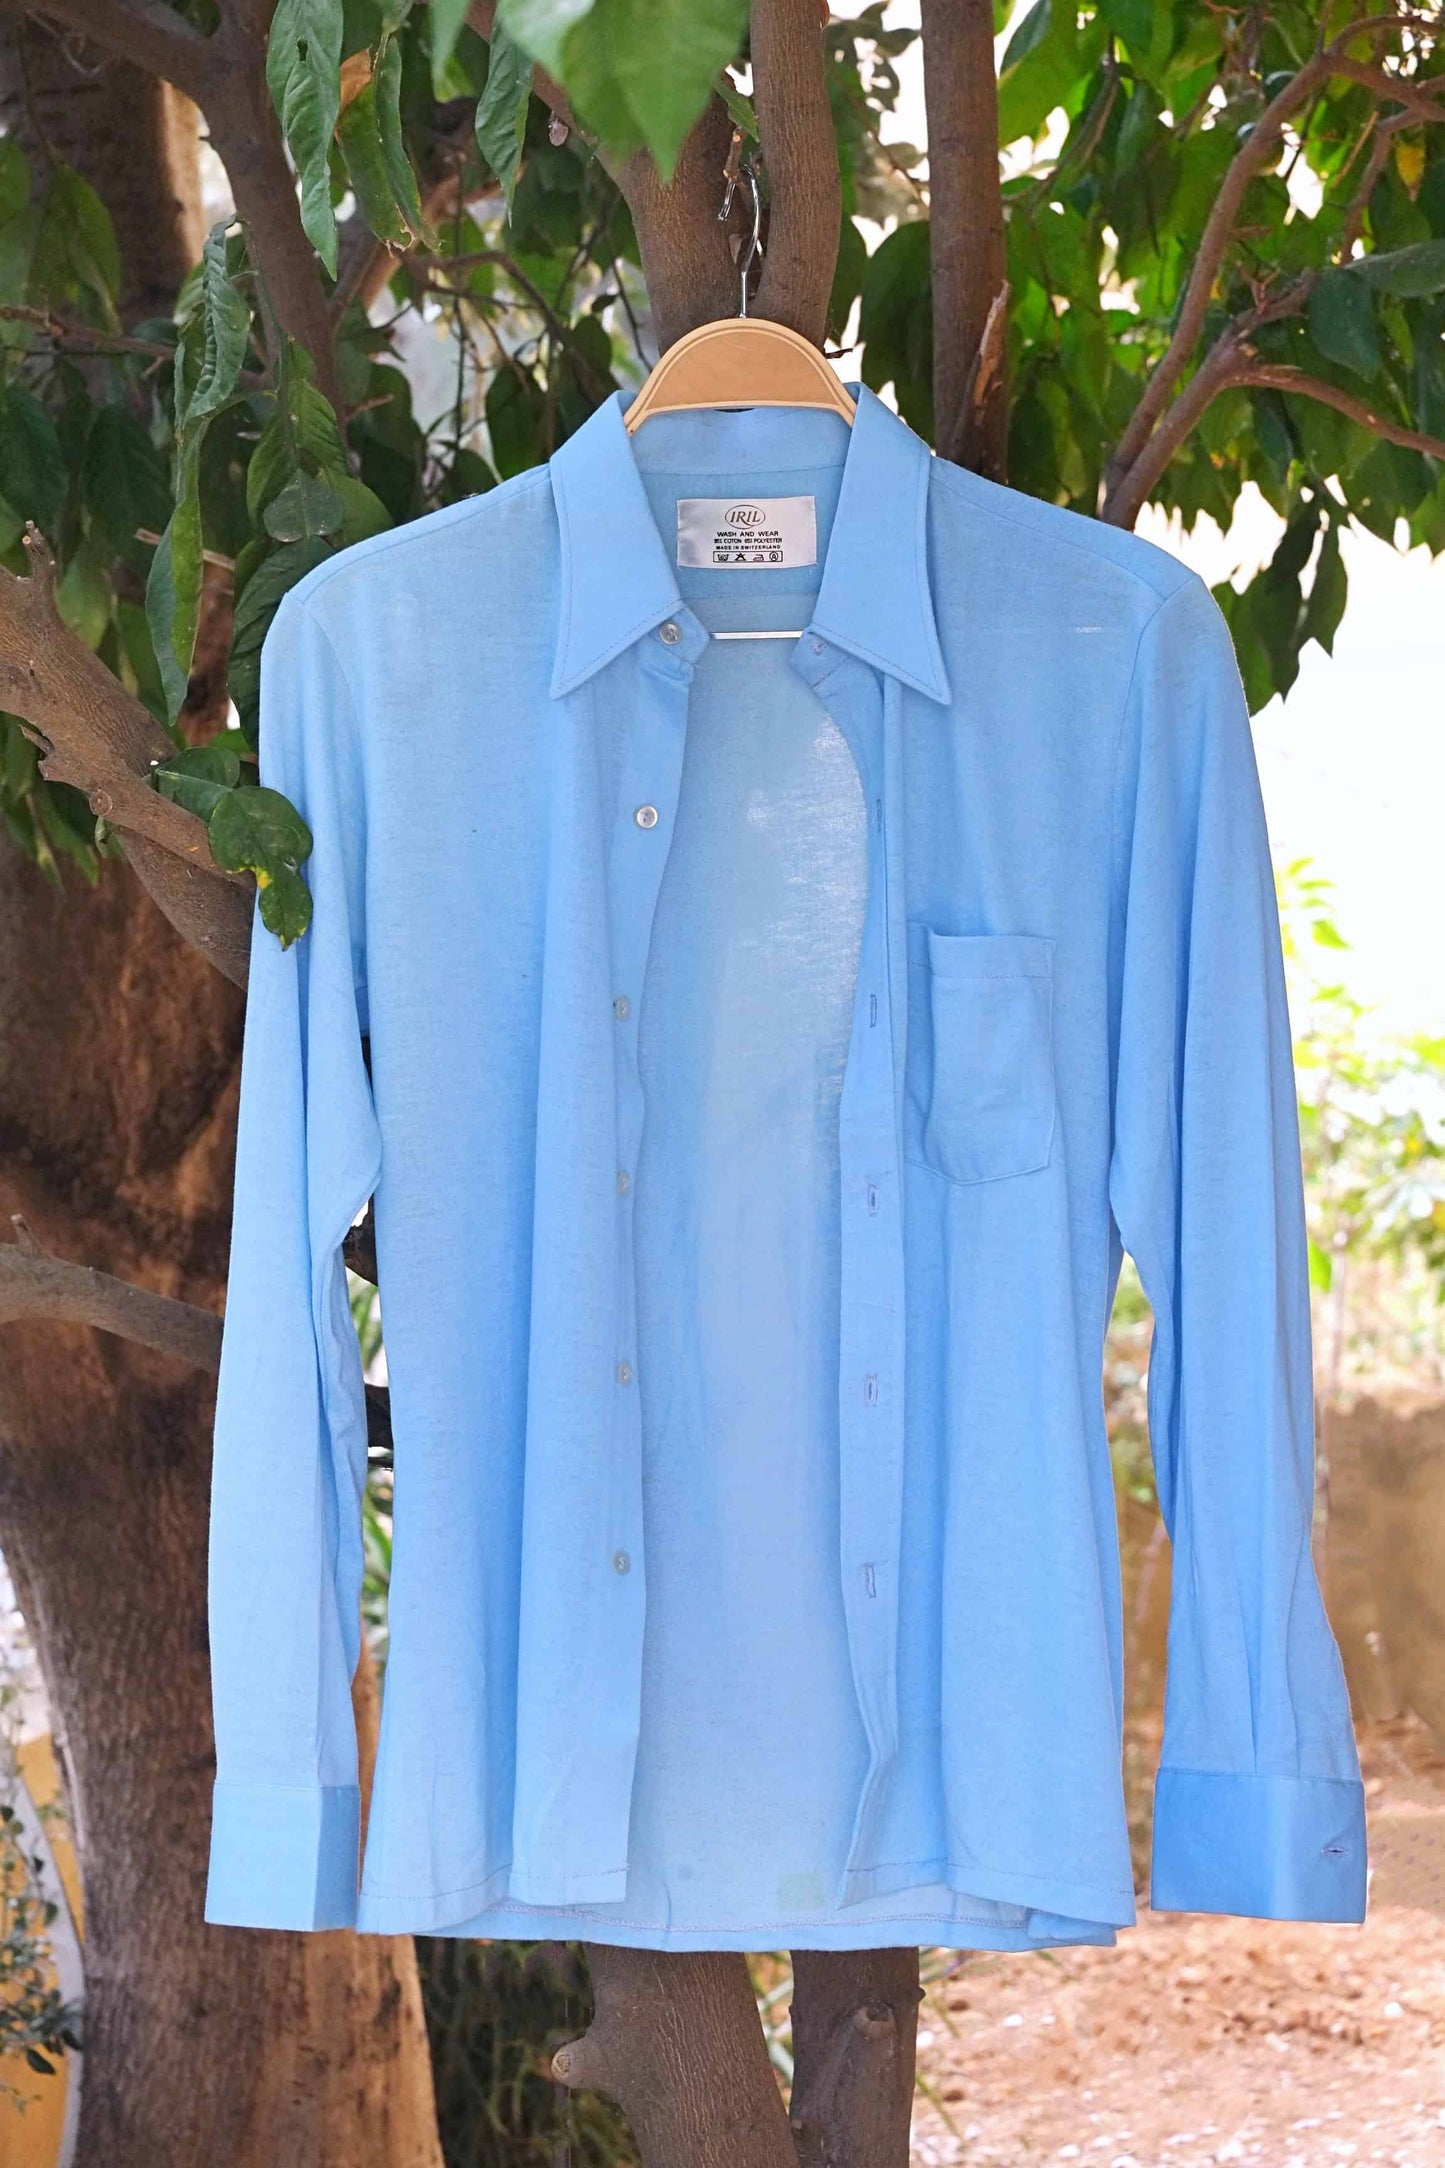 Vintage 70s pointy collar shirt blue